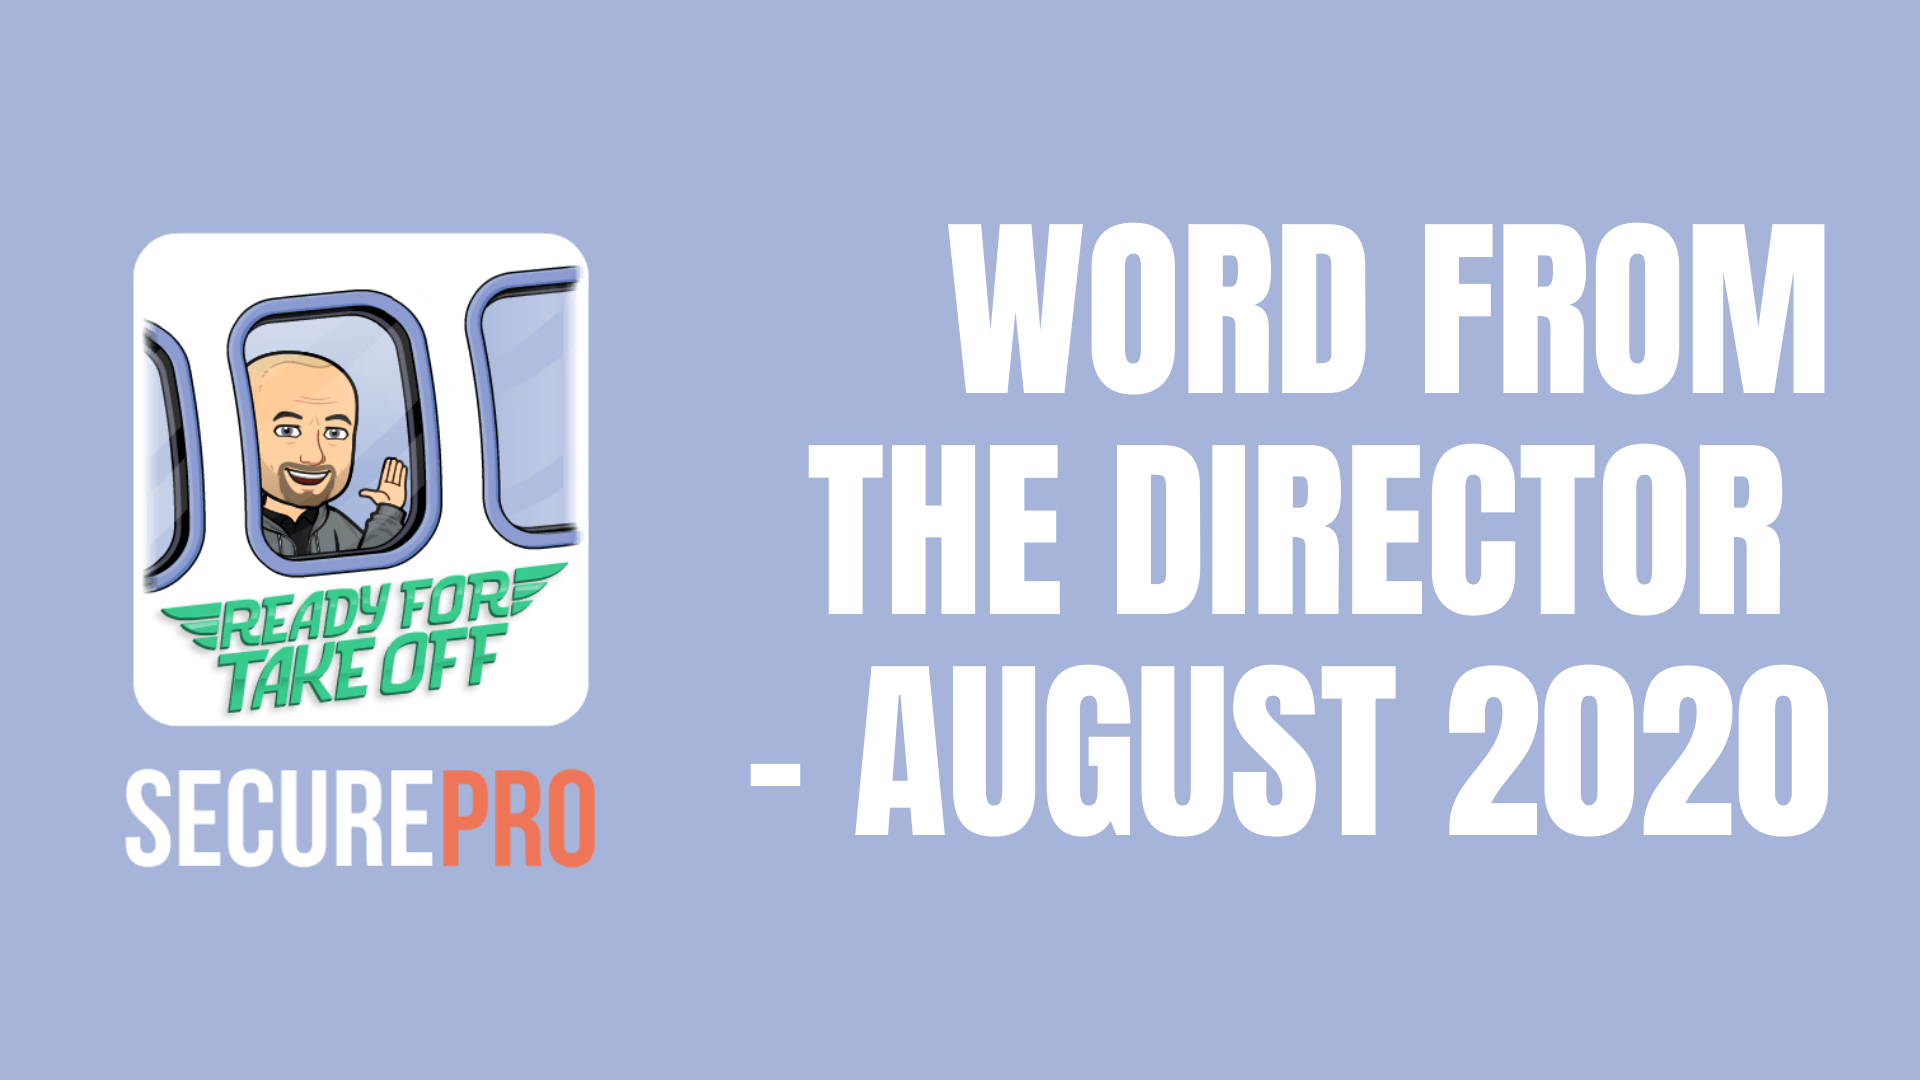 SecurePro a word from the director August 2020